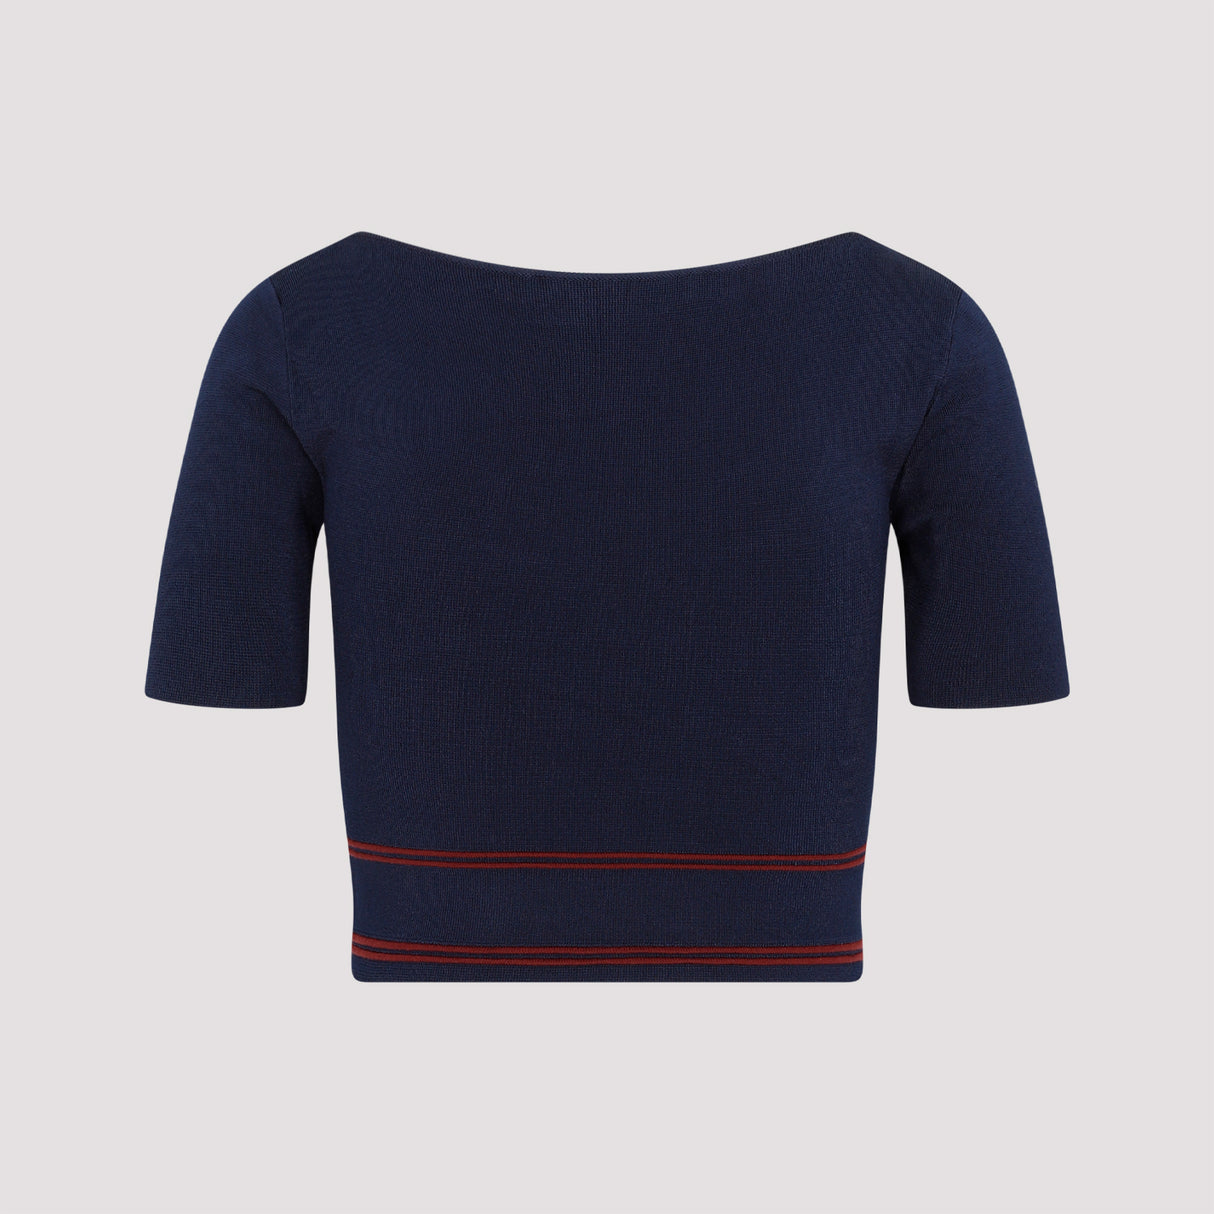 Blue Viscose Sweater - FW23 Collection